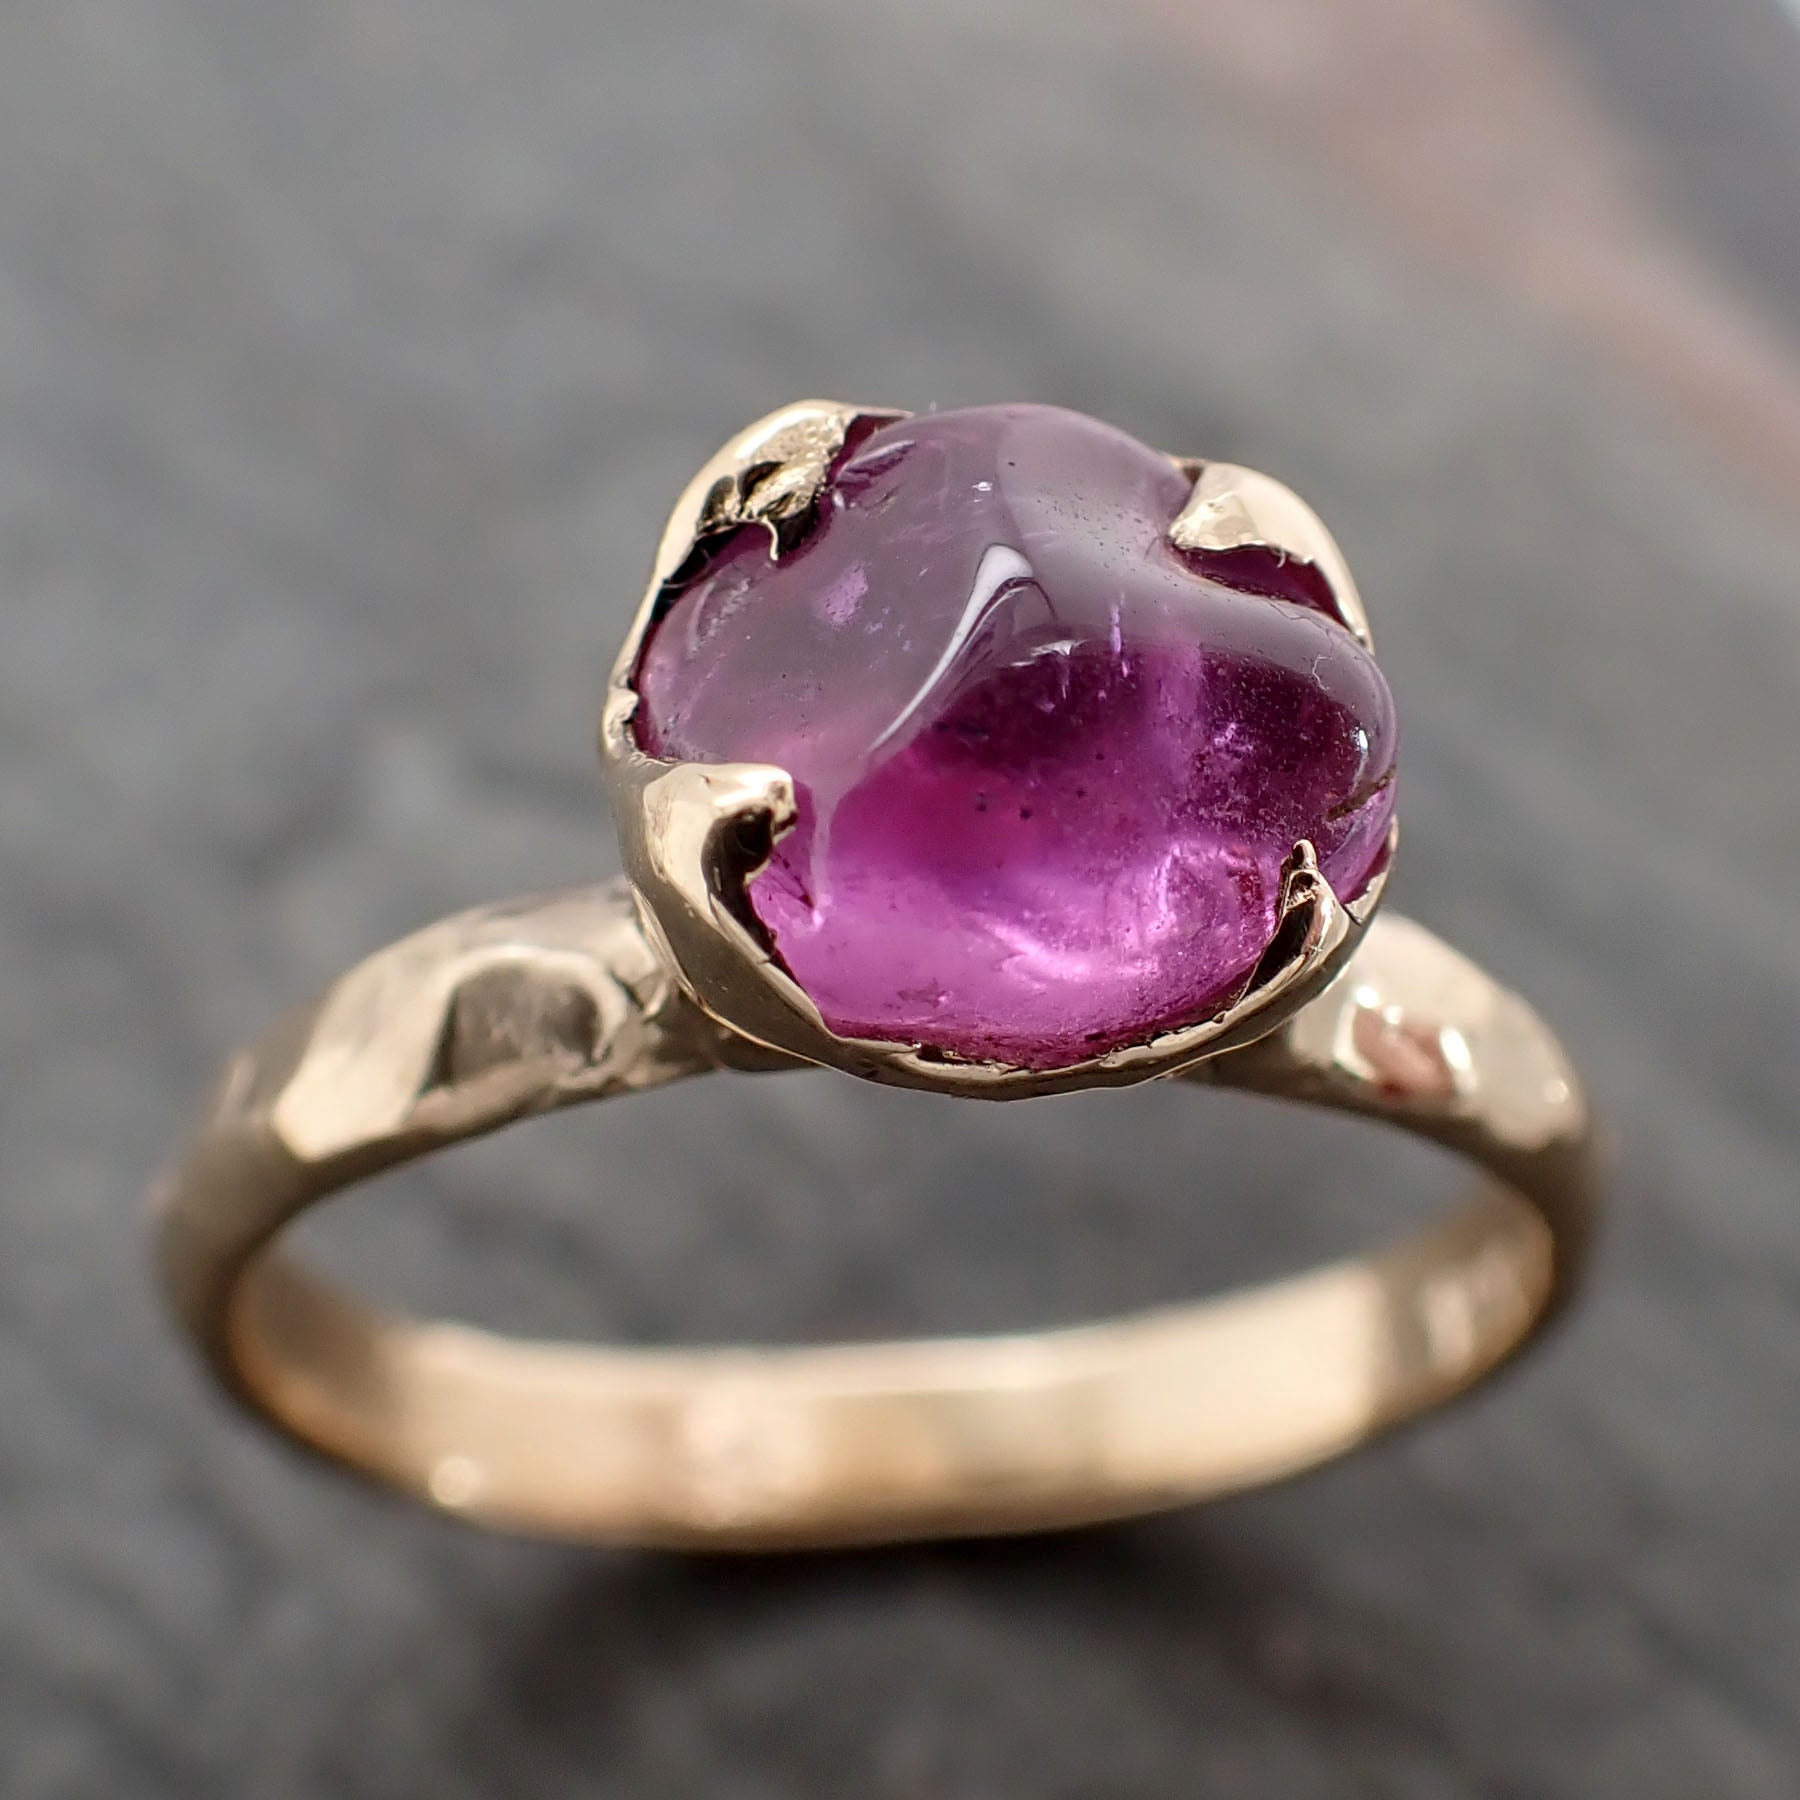 Sapphire Pebble candy 18k yellow gold Solitaire pink polished gemstone ring 2810